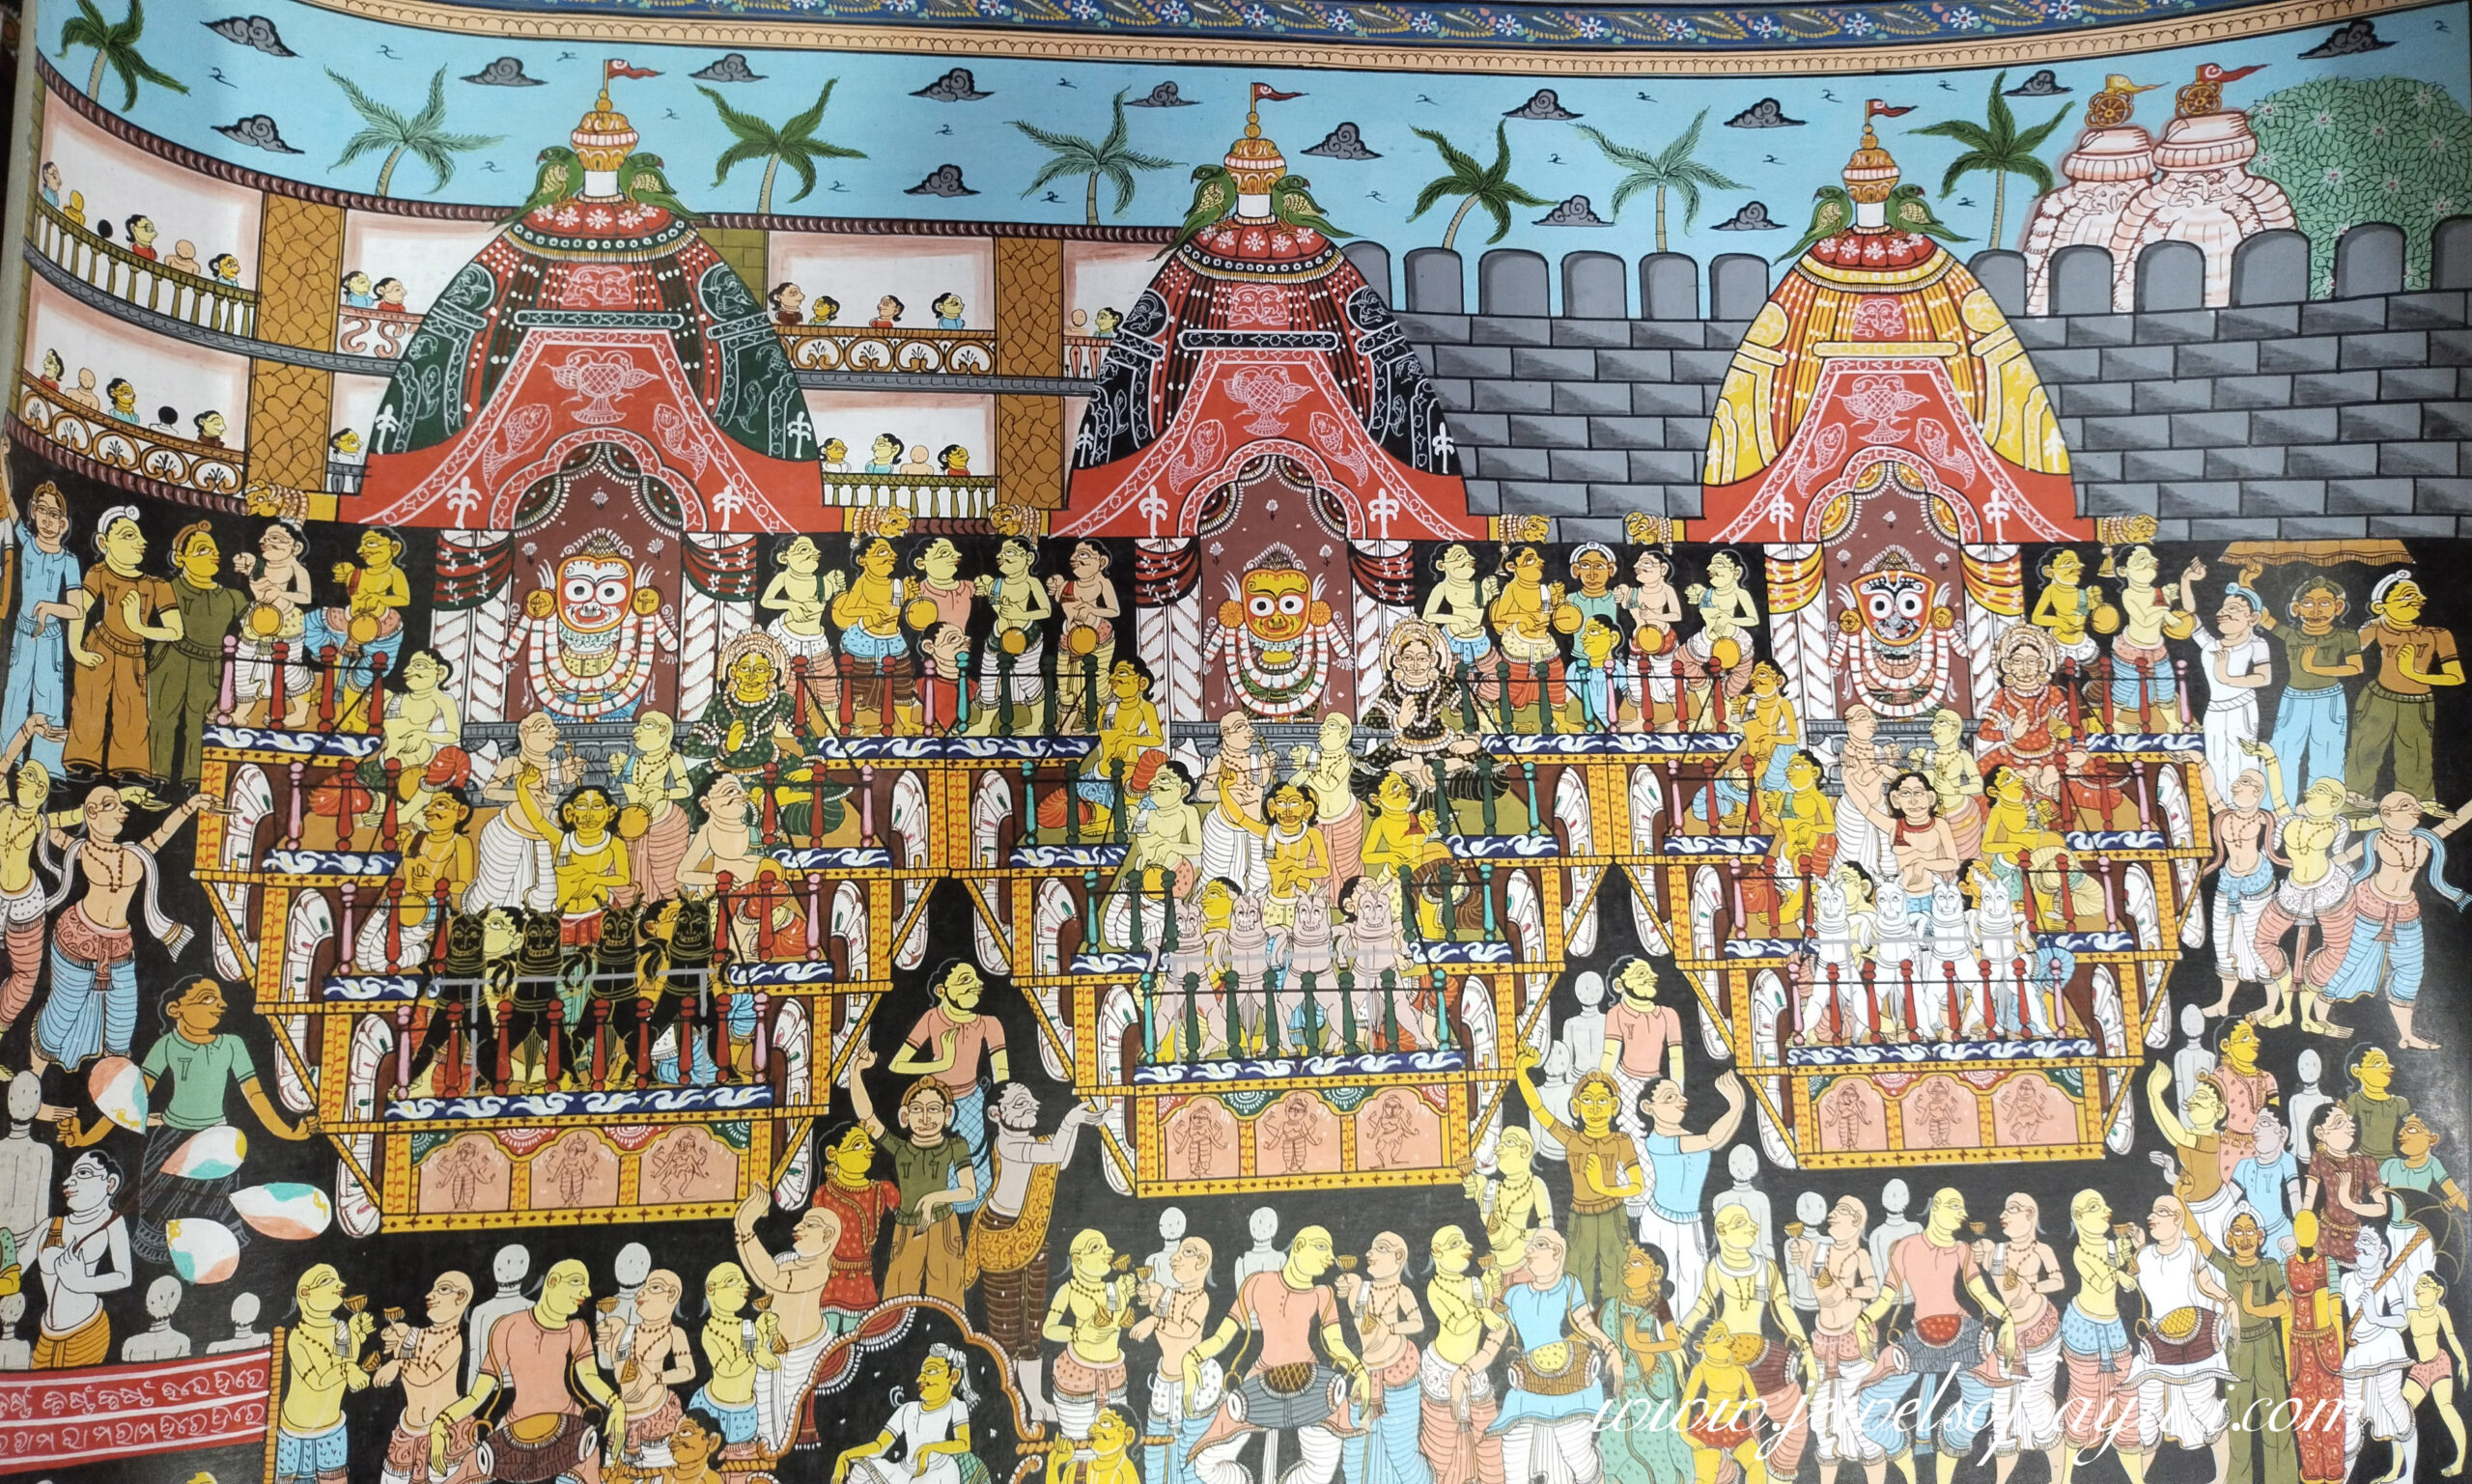 The craft of Pattachitra